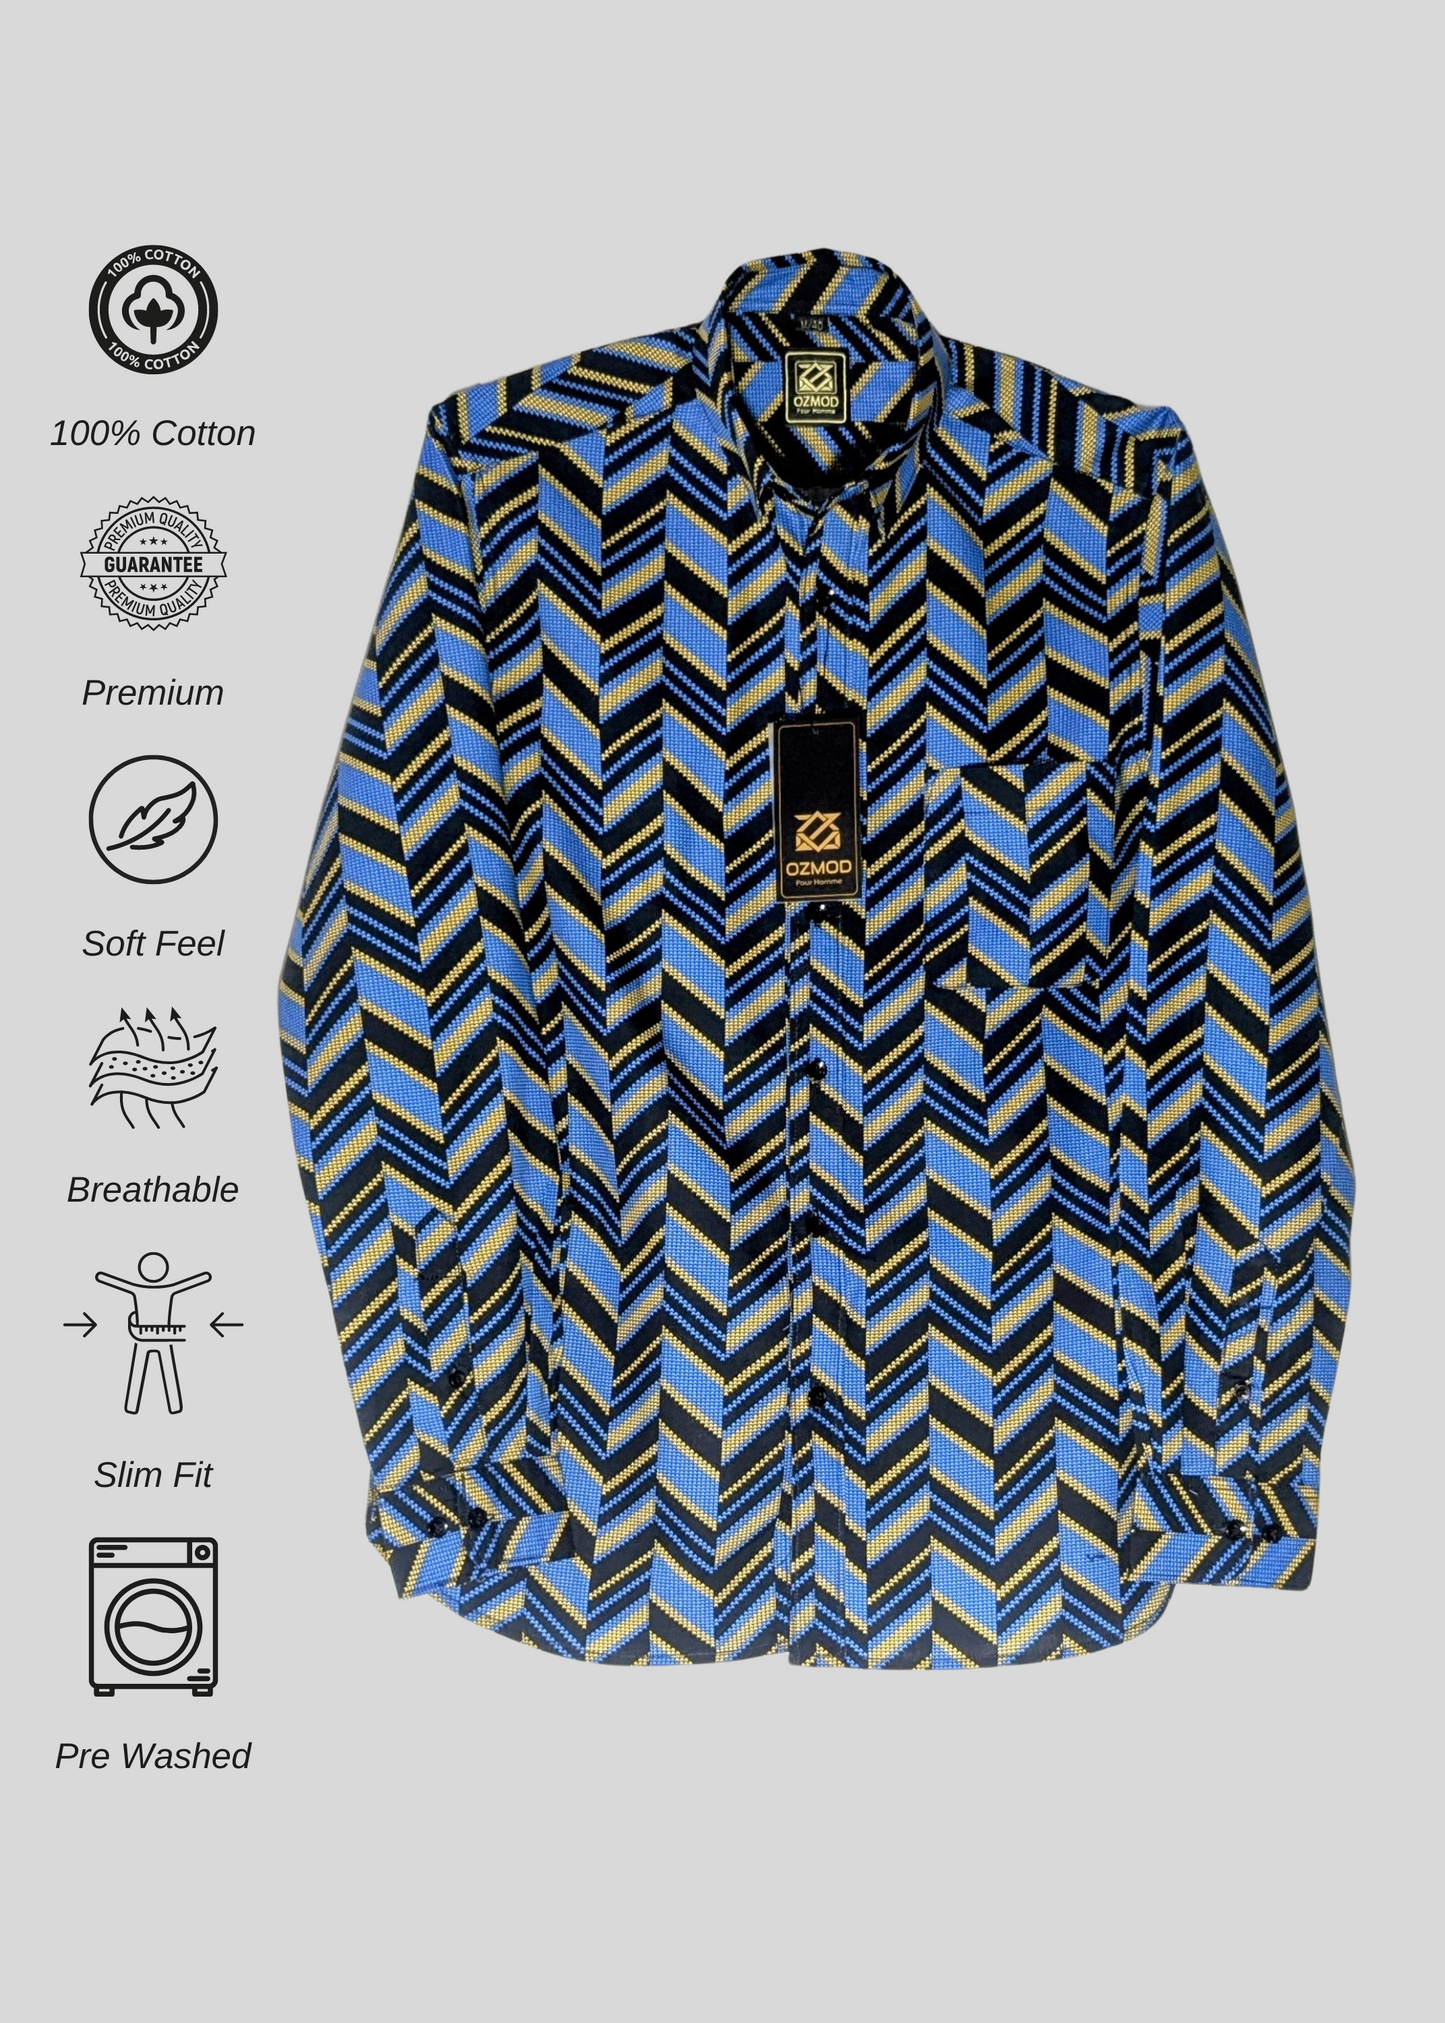 Black Tapered Shirt in Printed Cotton with Full Sleeves, Single Pocket